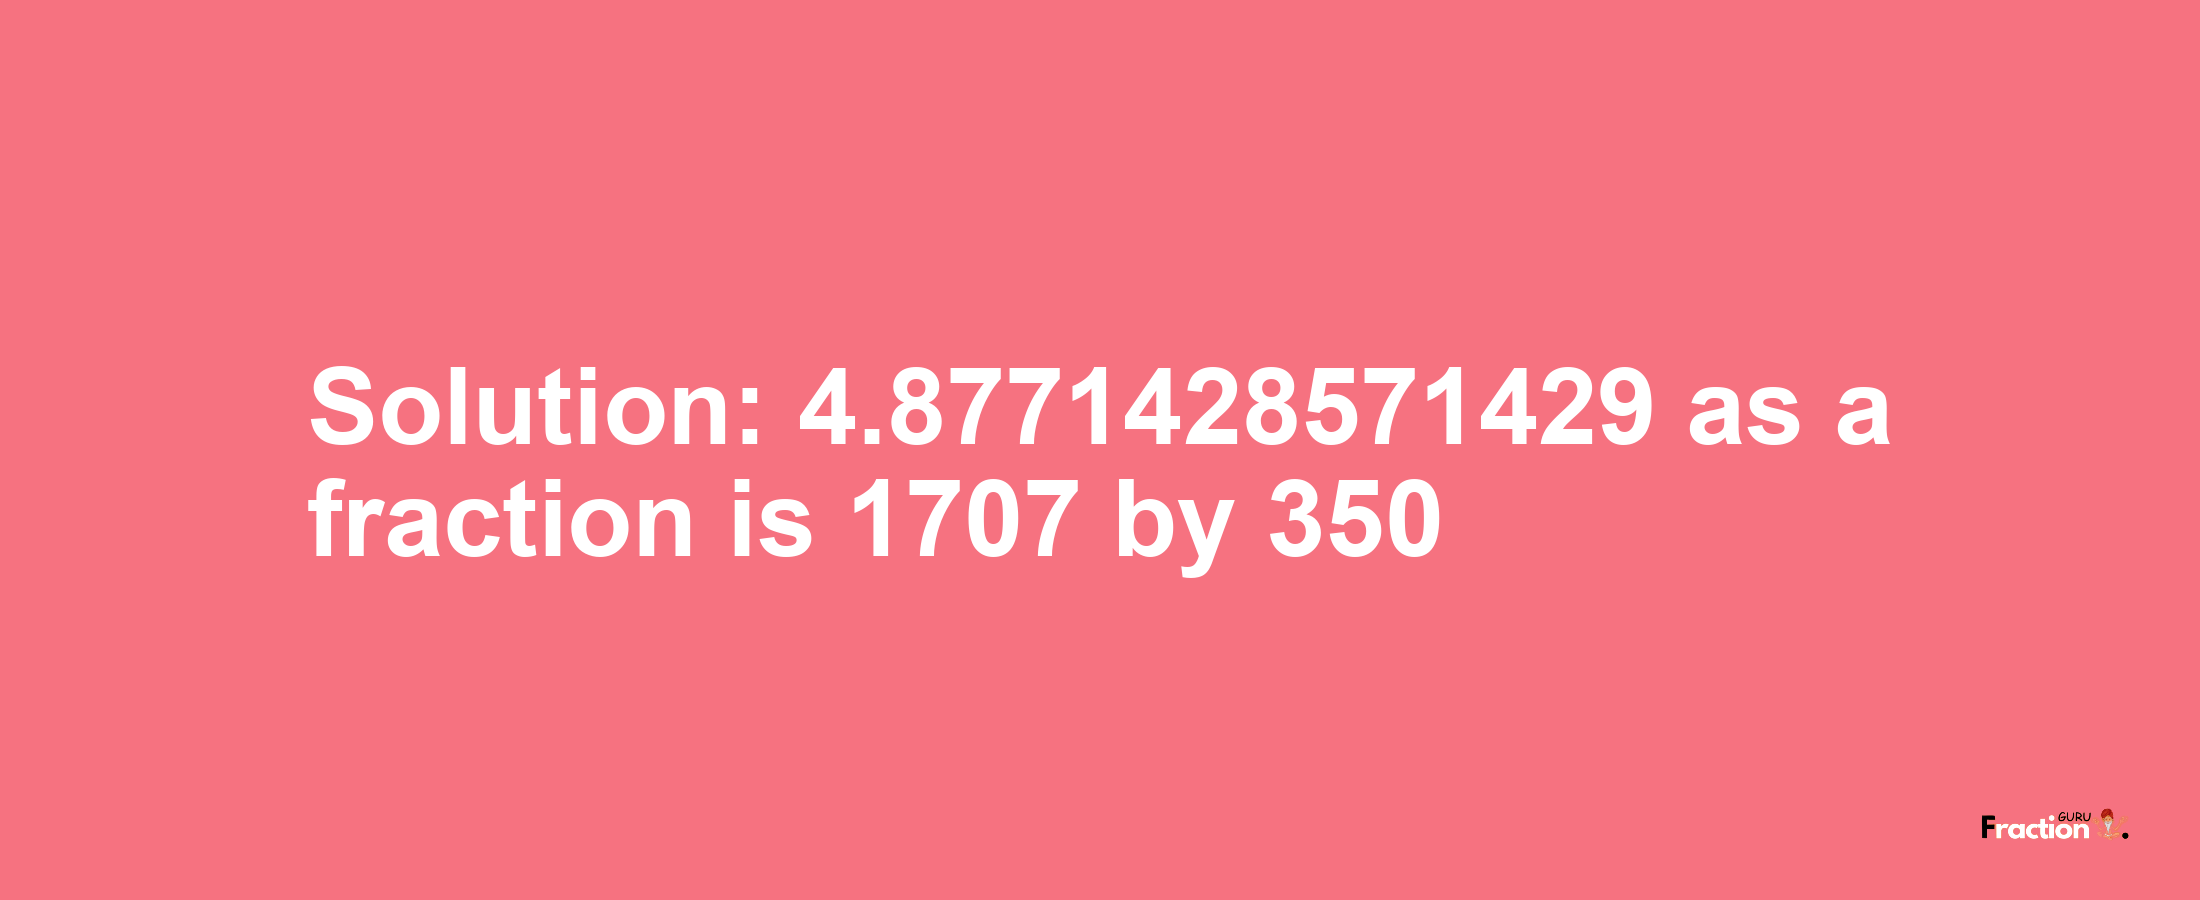 Solution:4.8771428571429 as a fraction is 1707/350